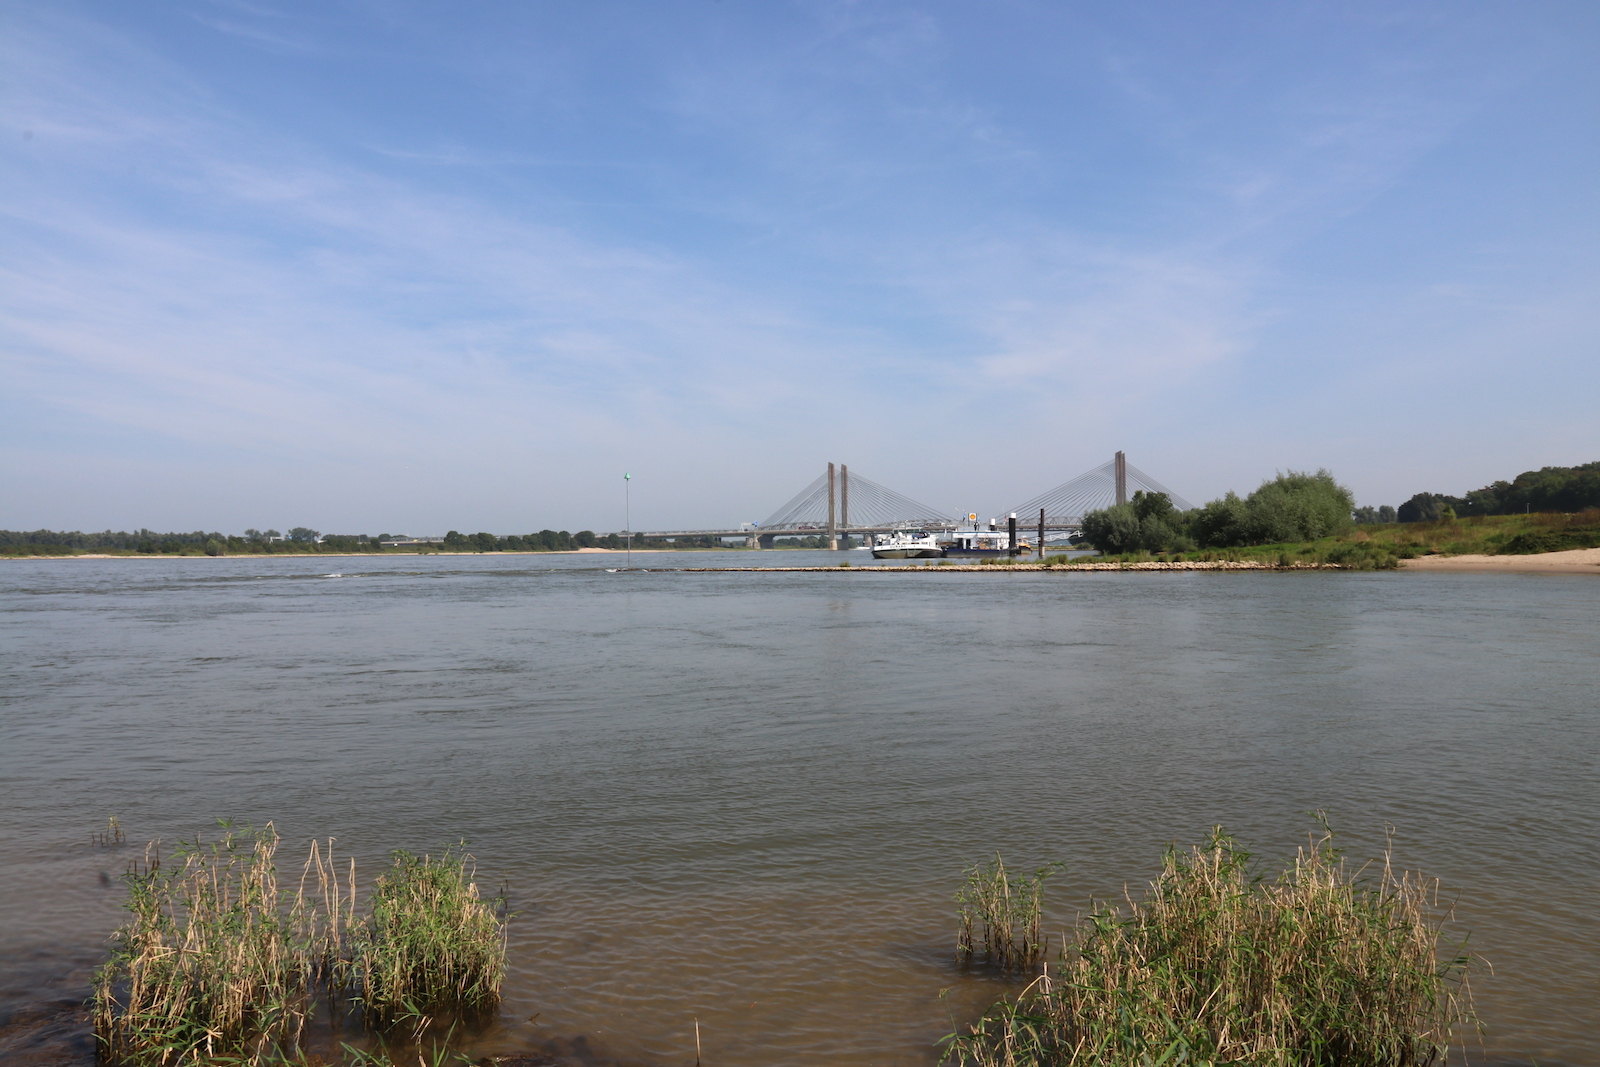 The Waal river with Martinus Nijhoff Bridge in the background